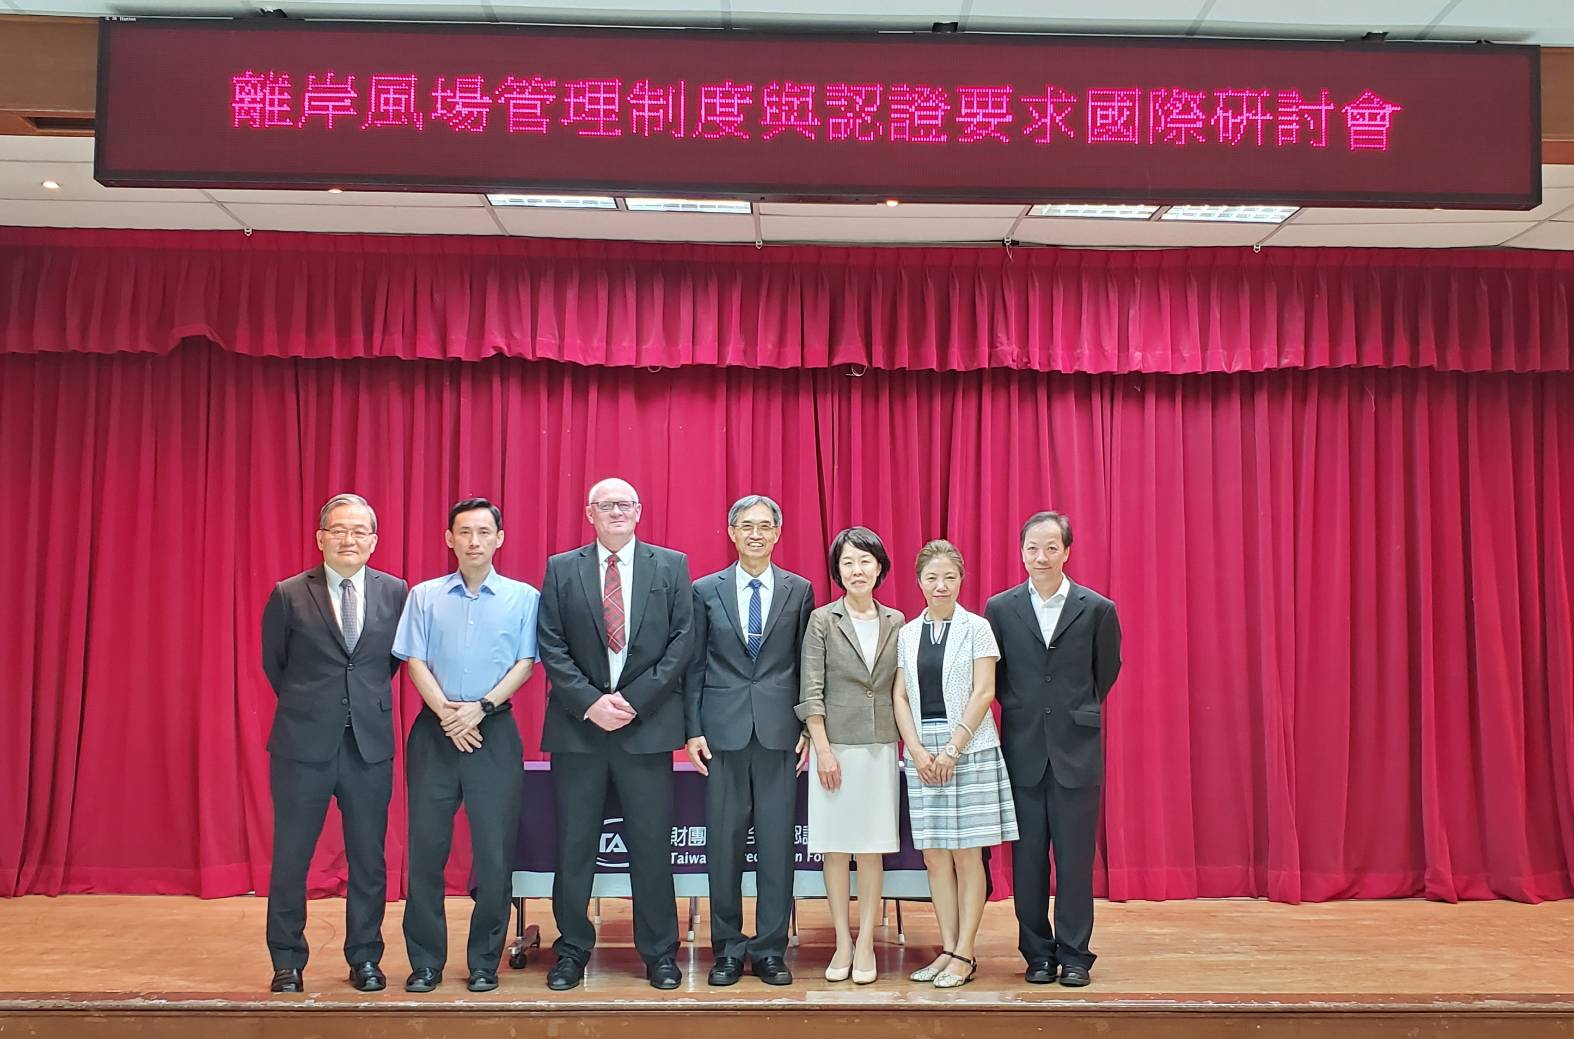 From left: Mr. Shu Chin-Sin, CEO of TAF; Mr. Men-Chieh Hsieh, section chief of BSMI; Mr. Alistair Mackinnon, the lead assessor of IECRE; Mr.Wang Chung-Lin, president of TAF; Ms. Yuko Yoneoka, the managing director of JAB; Chen Yuan-Zhen, department head of TAF; Mr. Shih Chao-Ping, vice CEO of TAF.